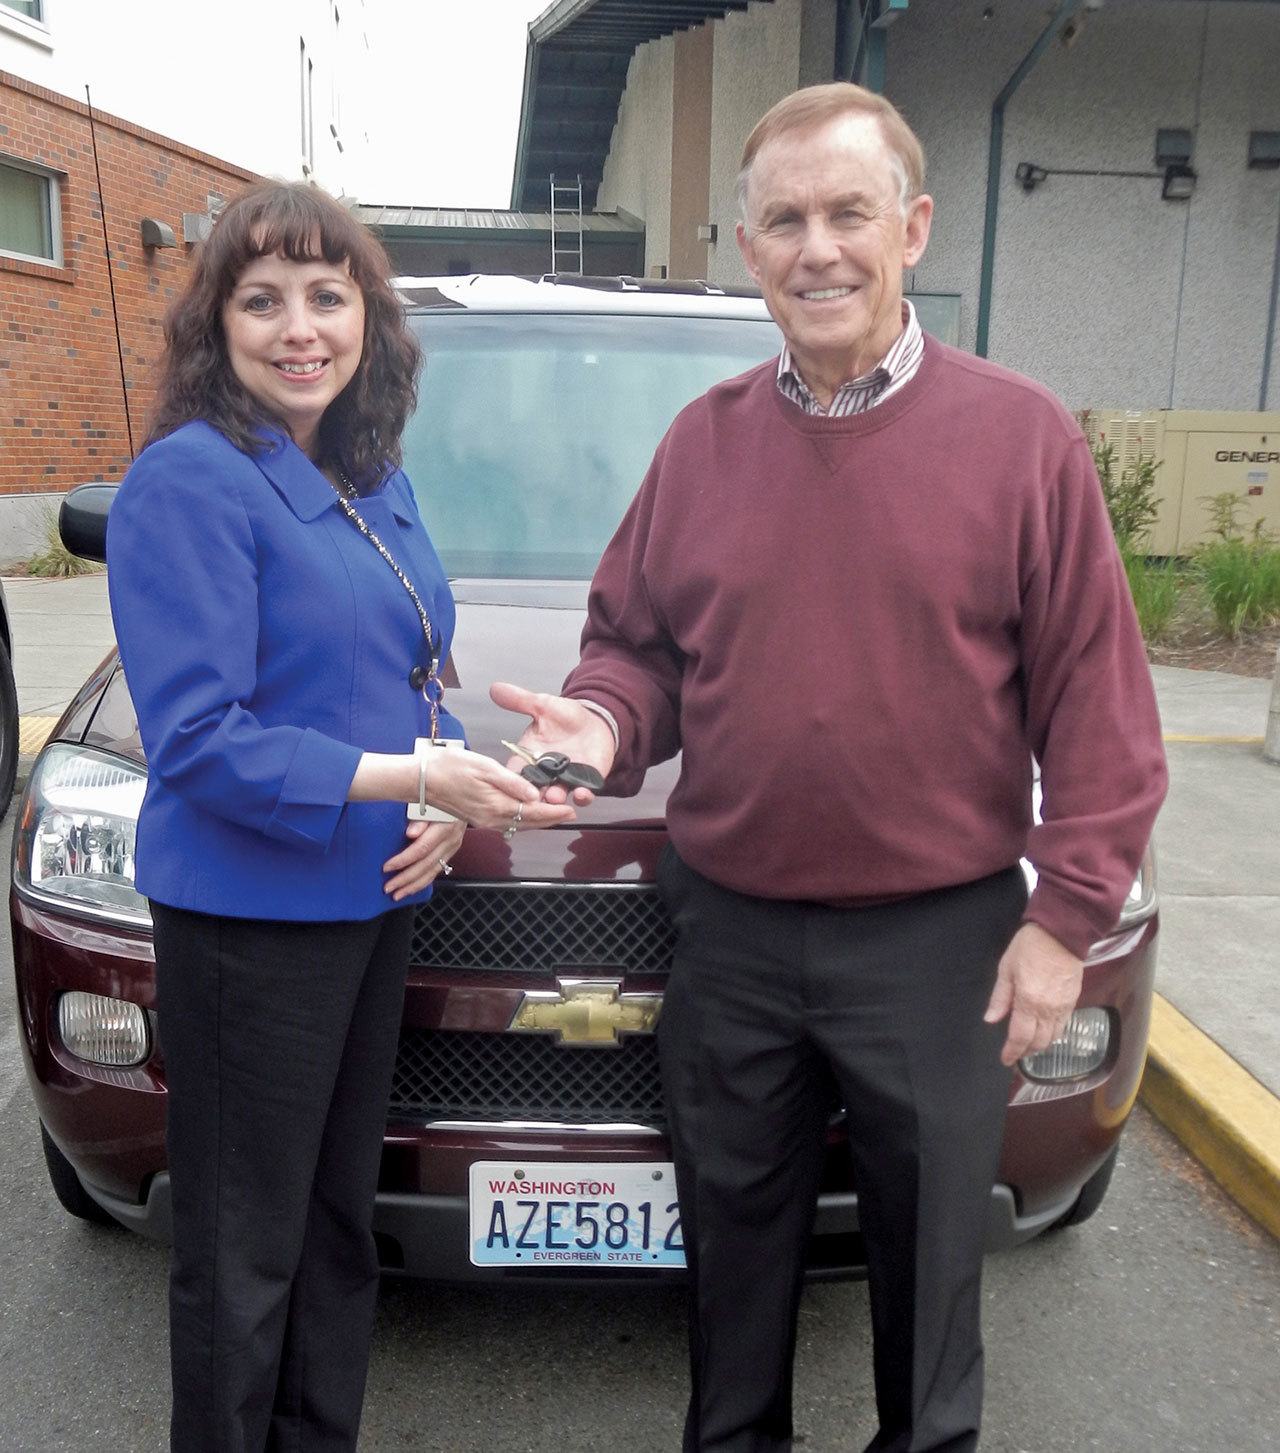 King County Councilmember Pete von Reichbauer with Robin Corak, executive director, Multi-Service Center, one of the agencies that will be receiving funds from the Youth and Family Homelessness Prevention Initiative that is part of the Best Starts for Kids Levy. COURTESY PHOTO